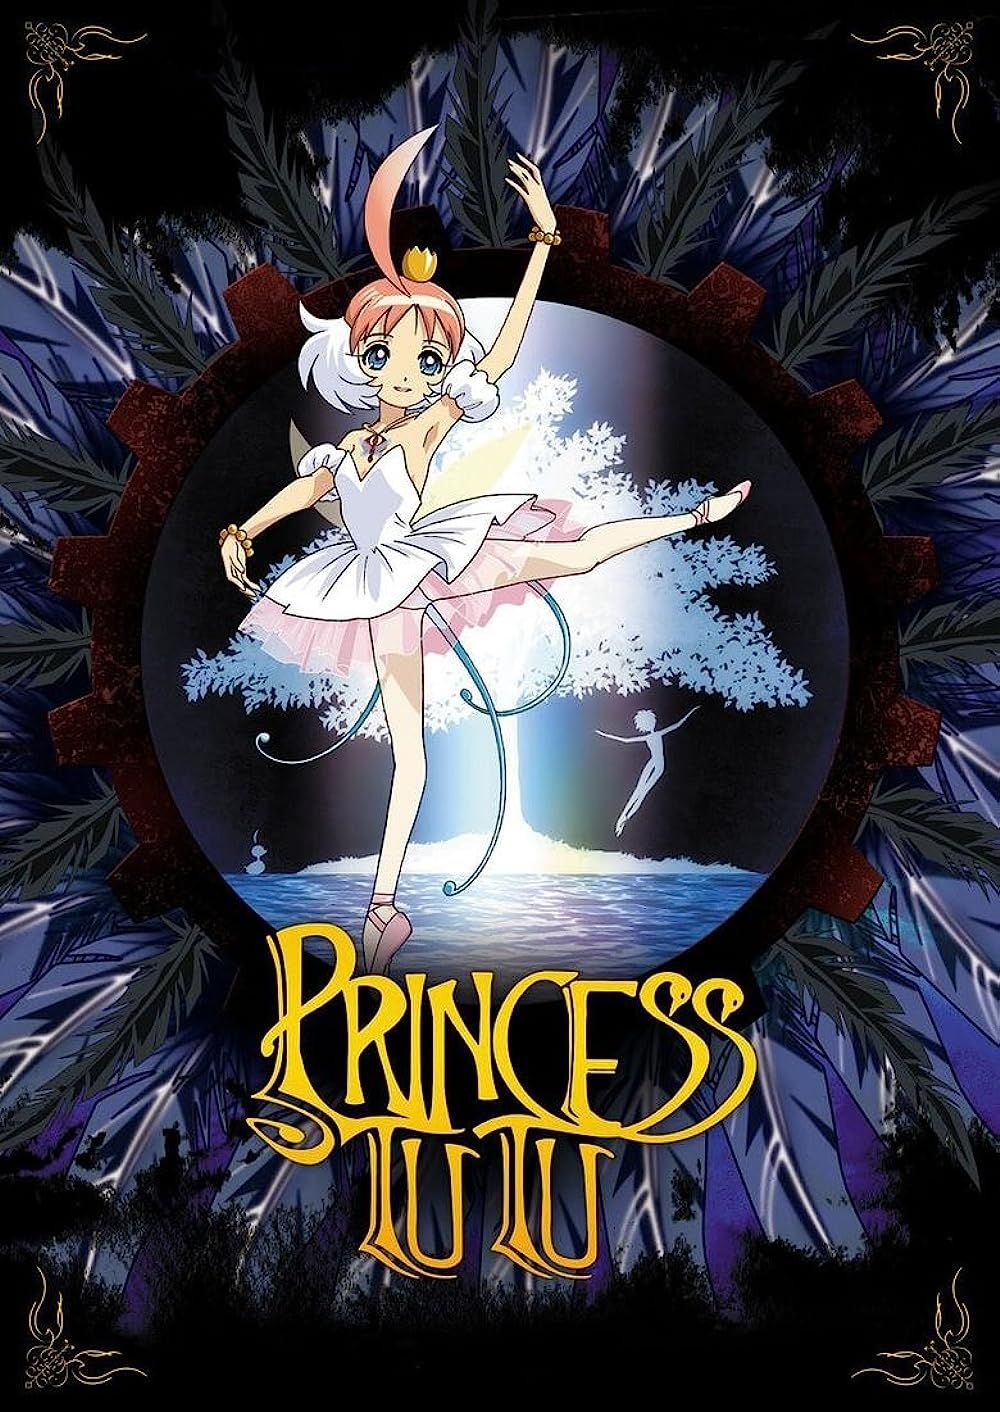 Duck turned into a ballerina on the poster of Princess Tutu